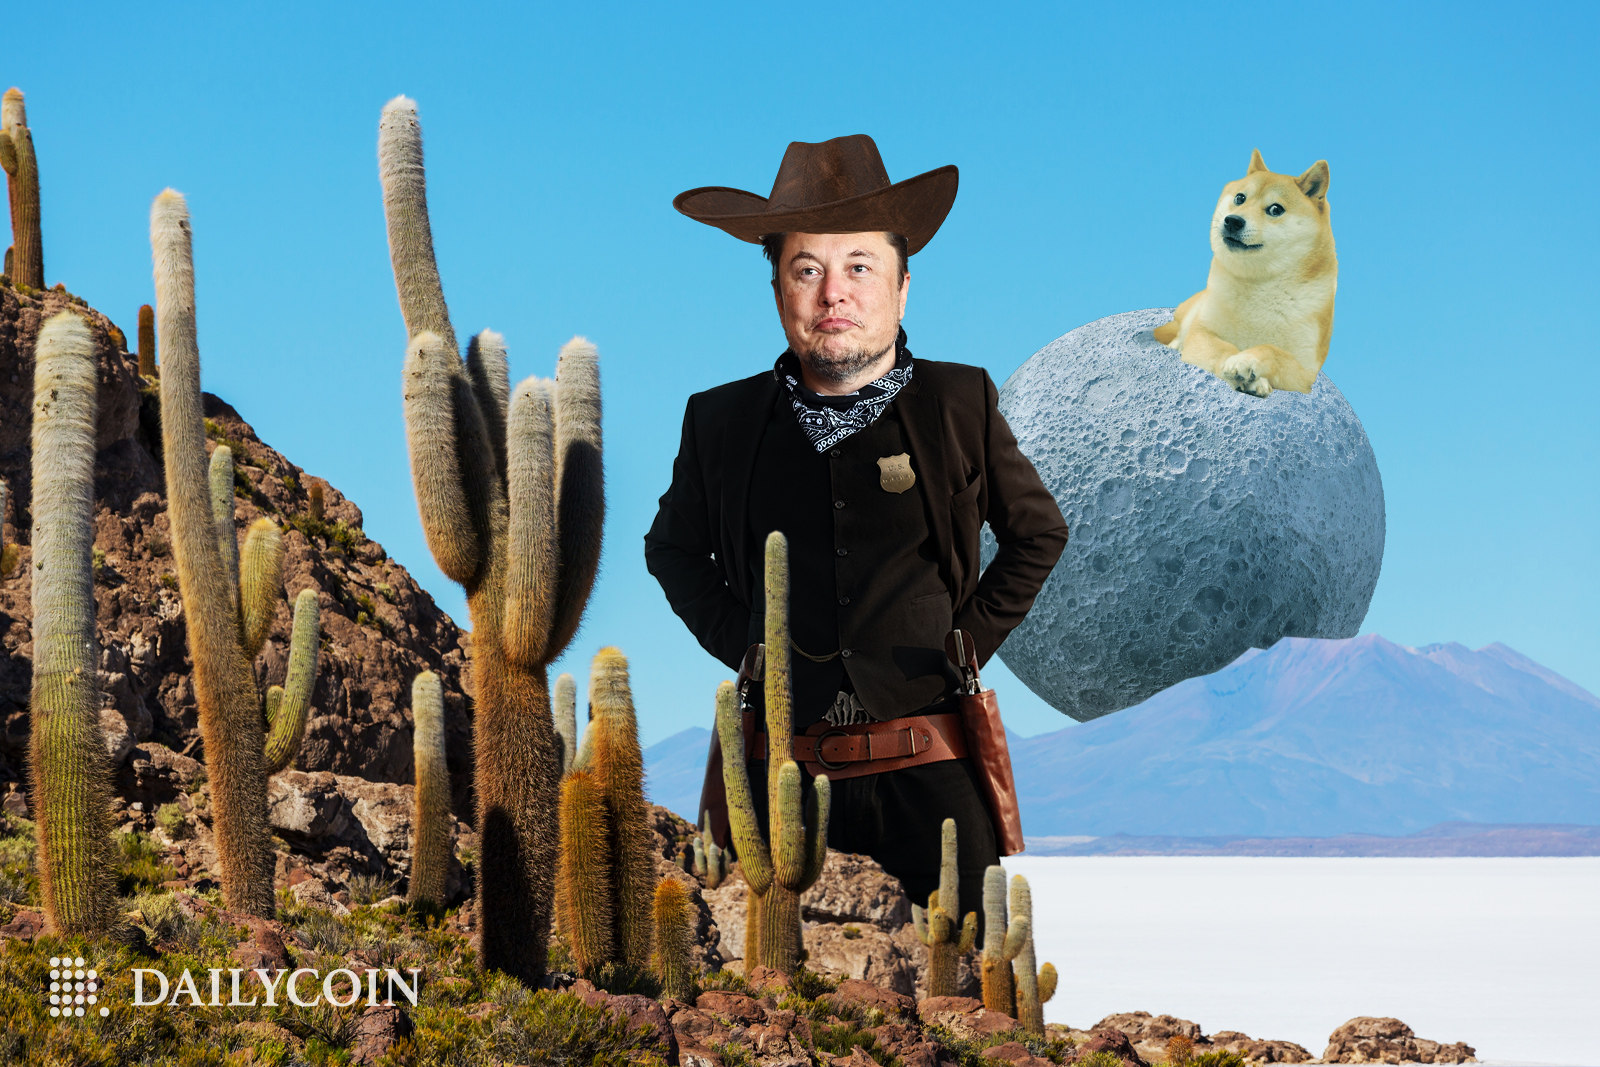 Elon Musk with a cowboy hat standing in the desert in front of doge on the moon.